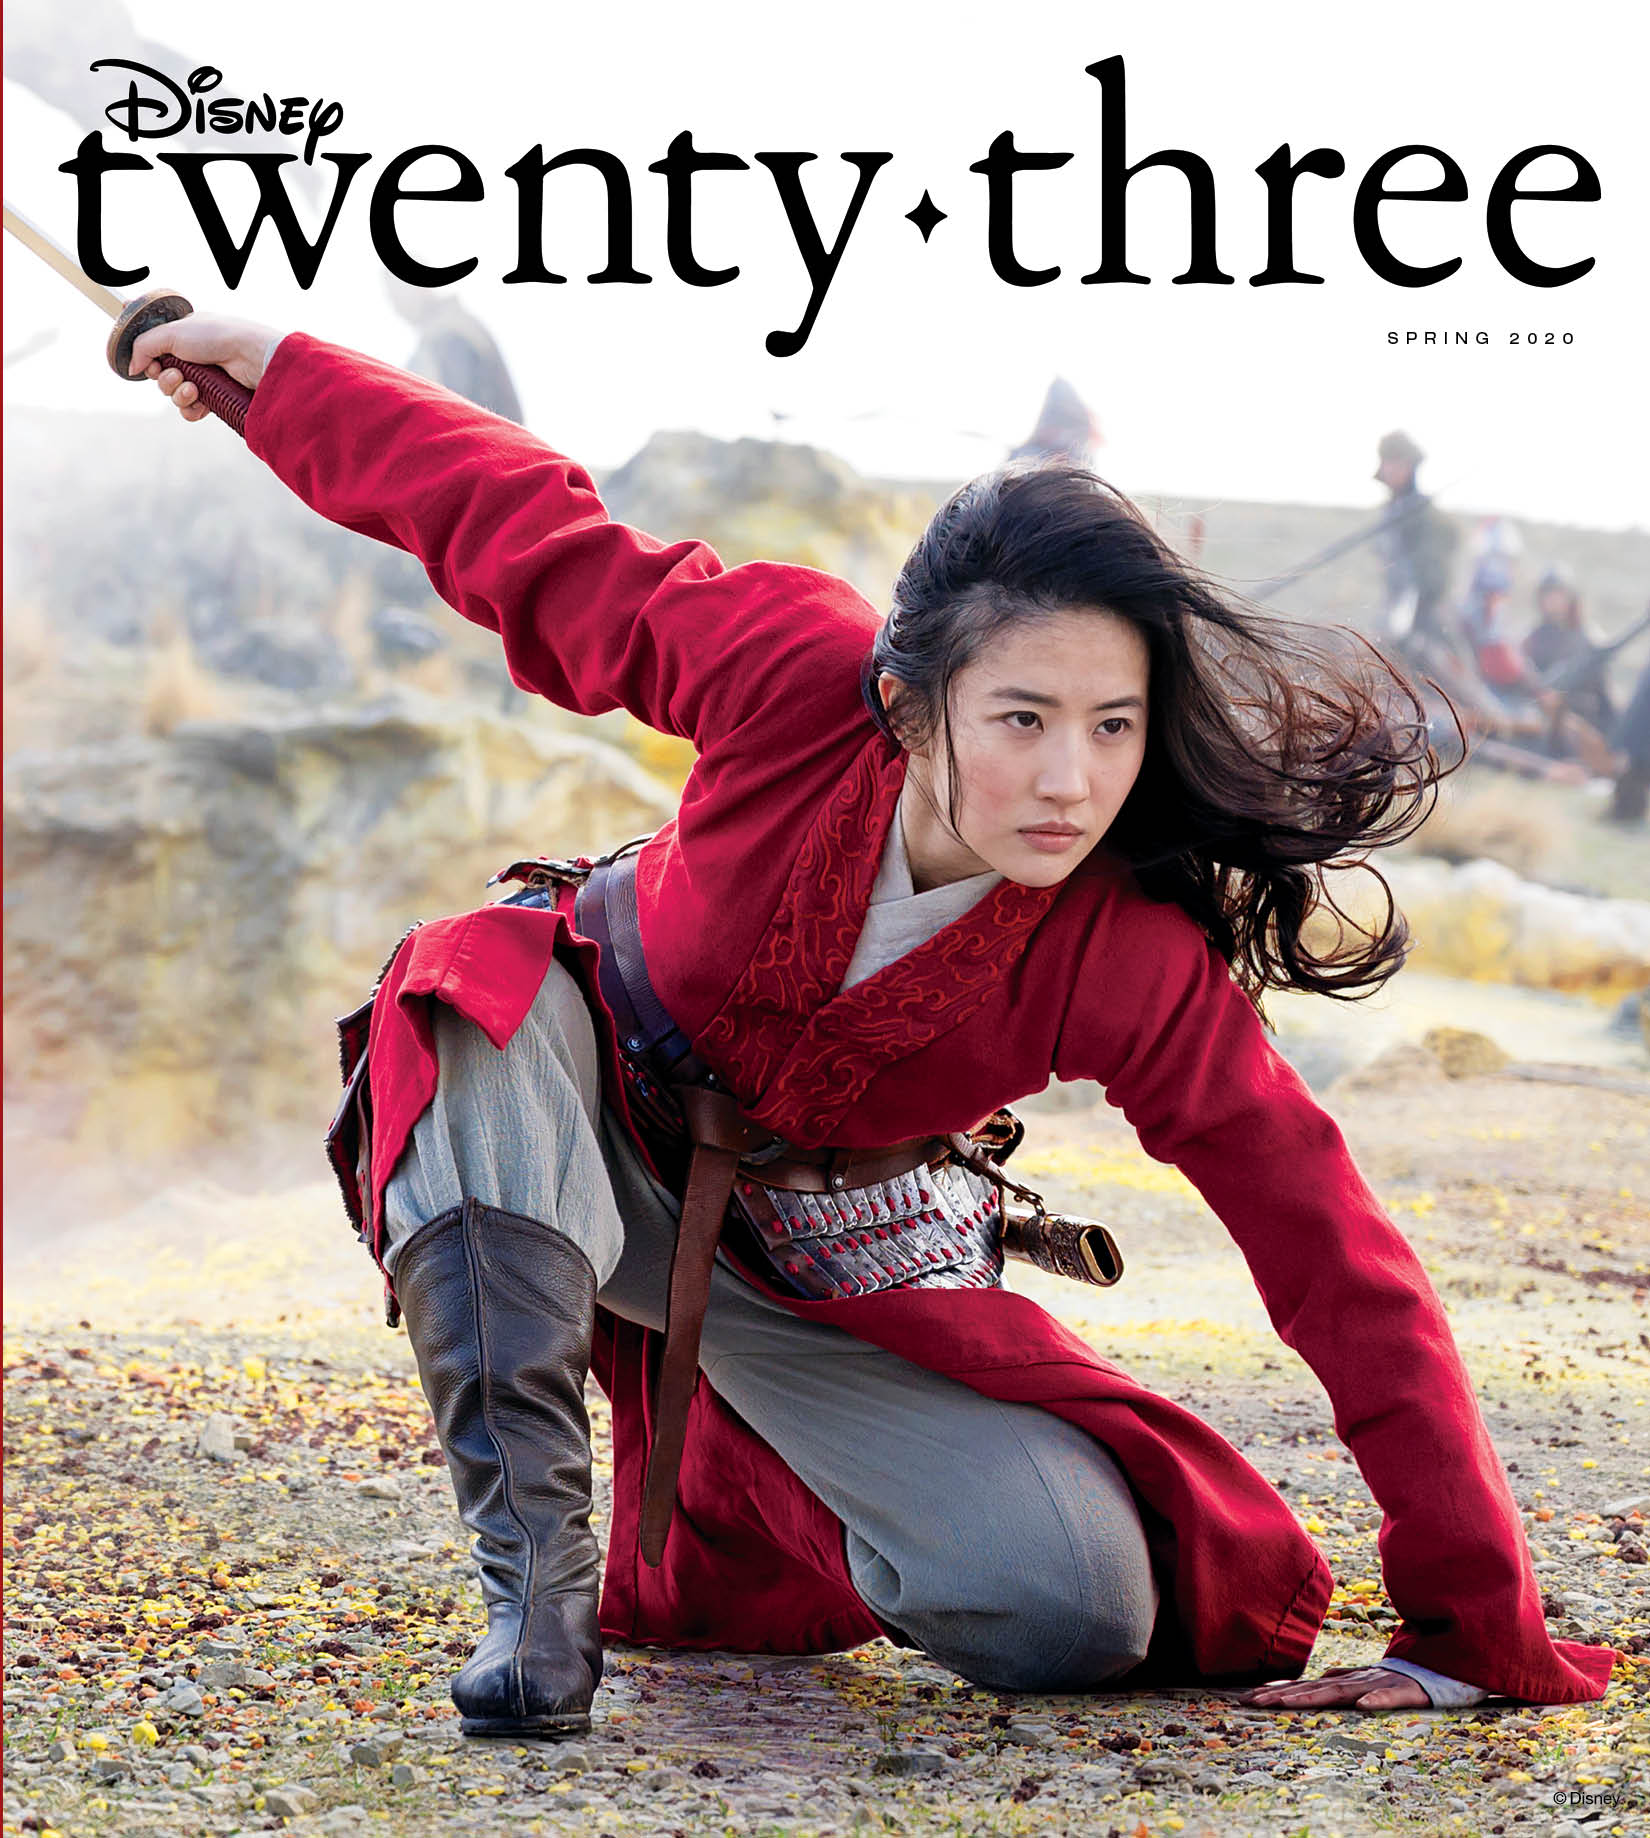 Live Action Mulan on the cover of the latest issue of D23 Magazine